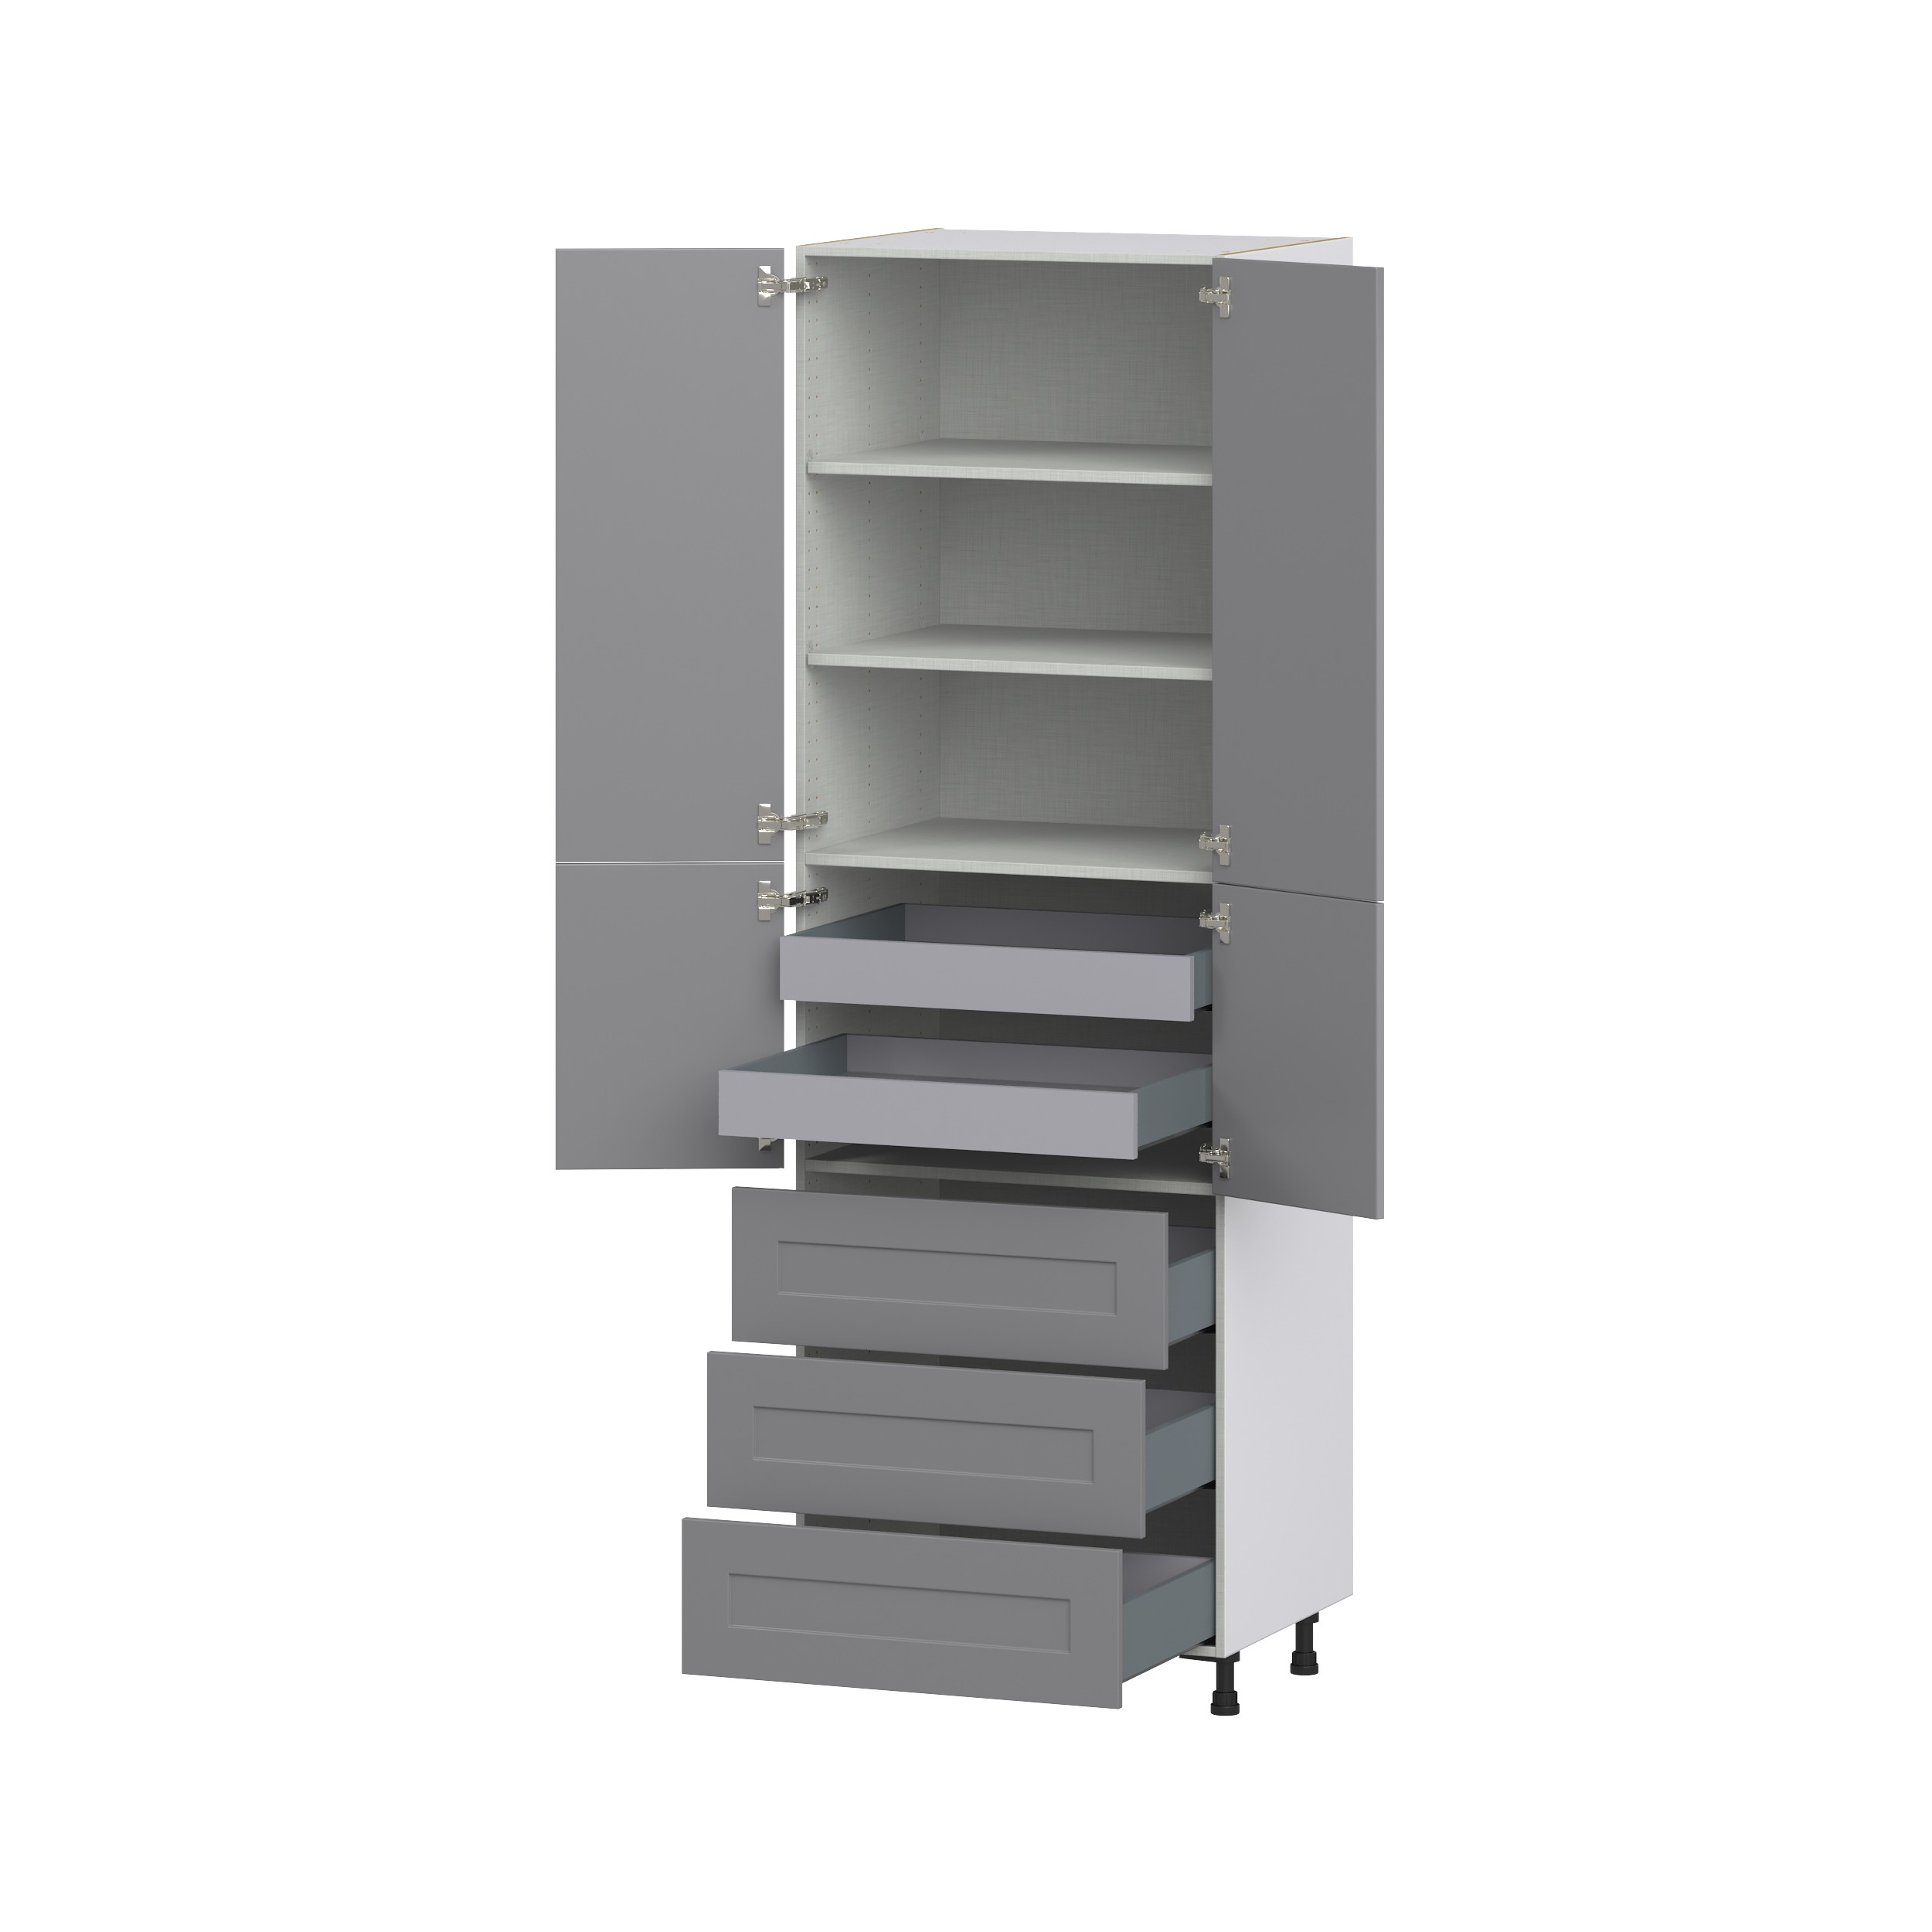 Willow Painted Slate Gray Shaker Assembled Pantry Cabinet 4 Doors with 3 Drawers and 2 Inner Drawers (30 in. W X 94.5 in. H X 24 in. D)